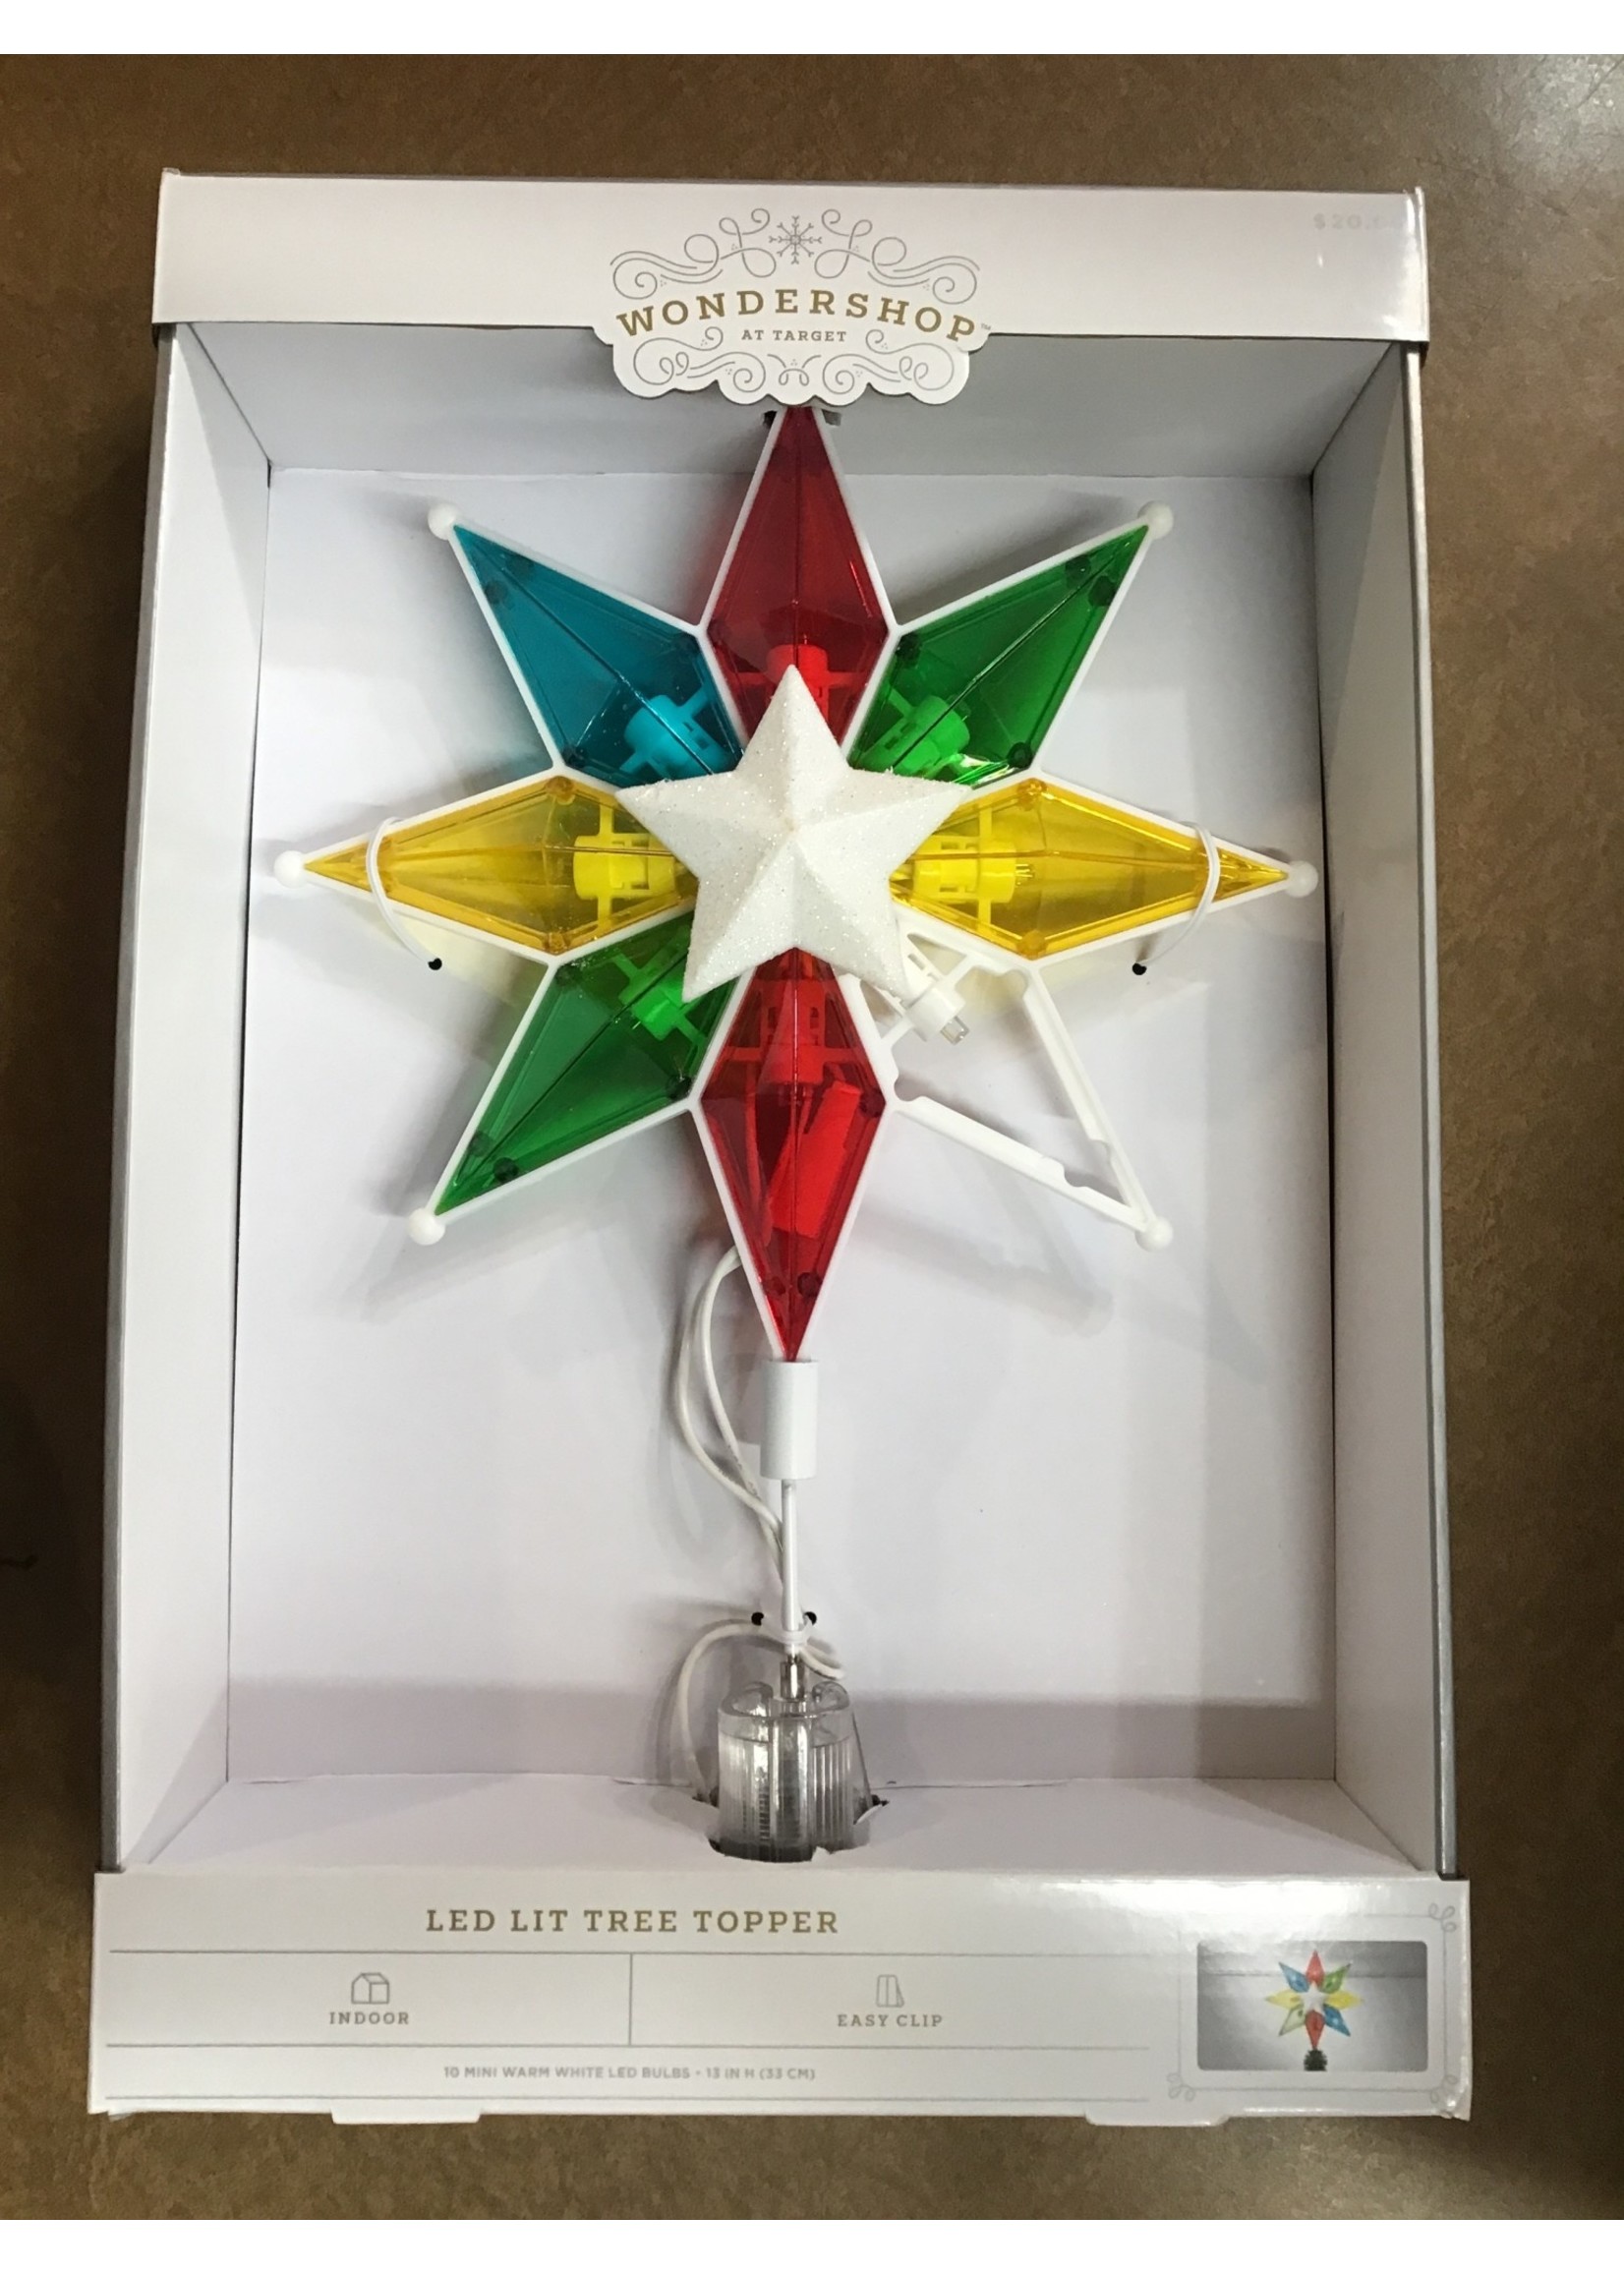 Missing 1 shield (Blue) -13in Lit Stained Glass Christmas Tree Topper Multicolored - Wondershop